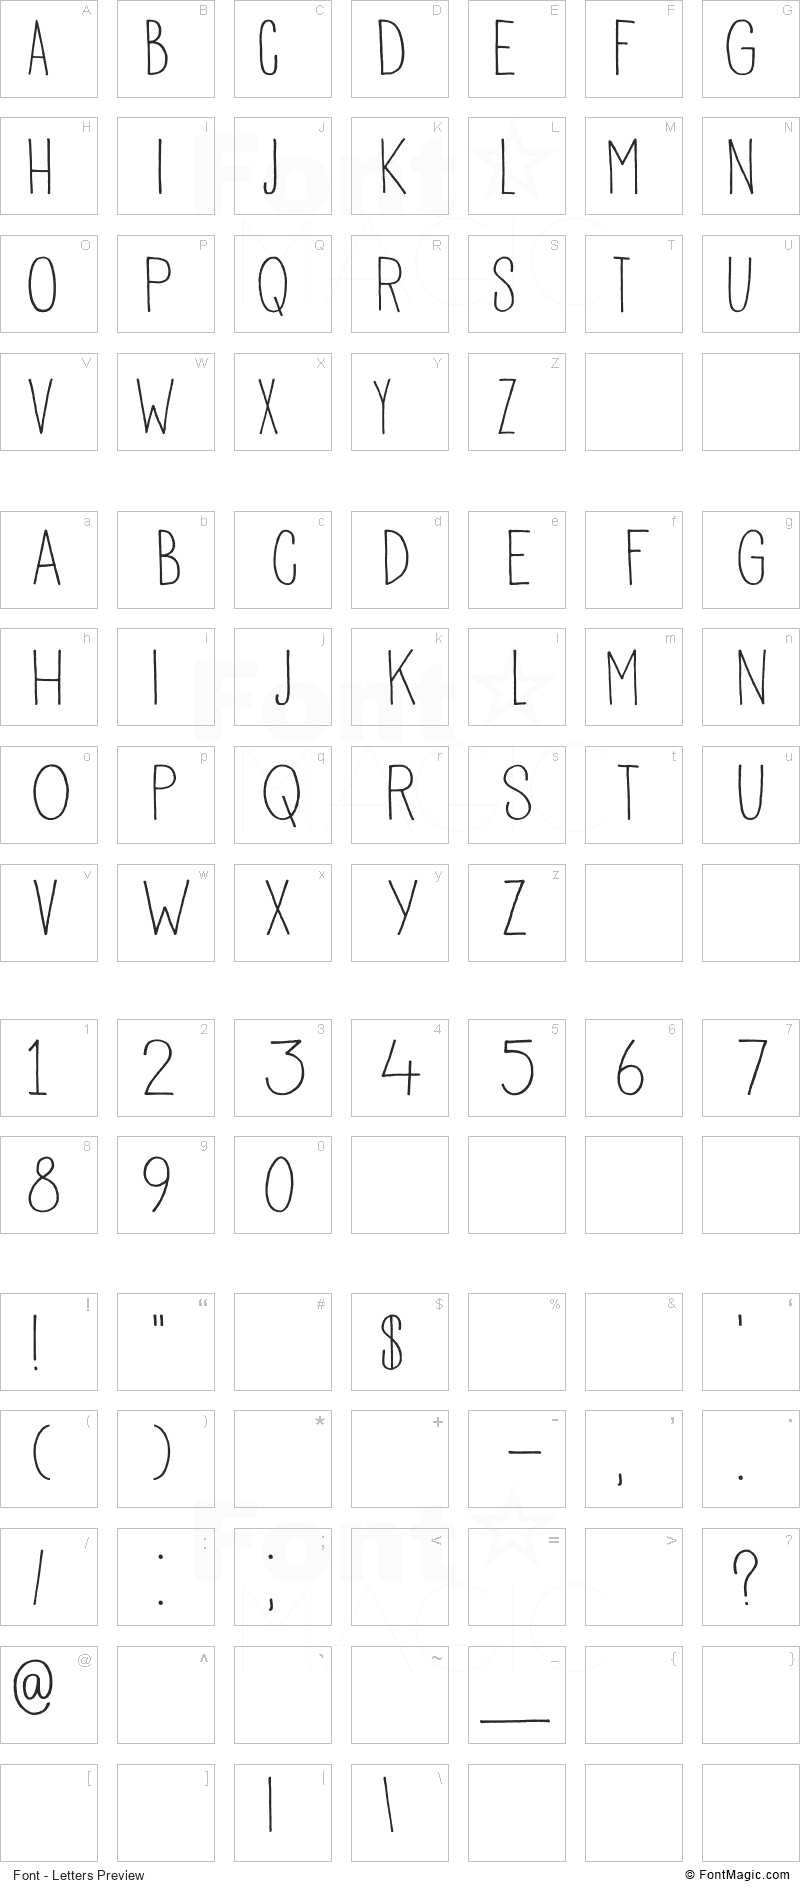 DK Pisang Font - All Latters Preview Chart